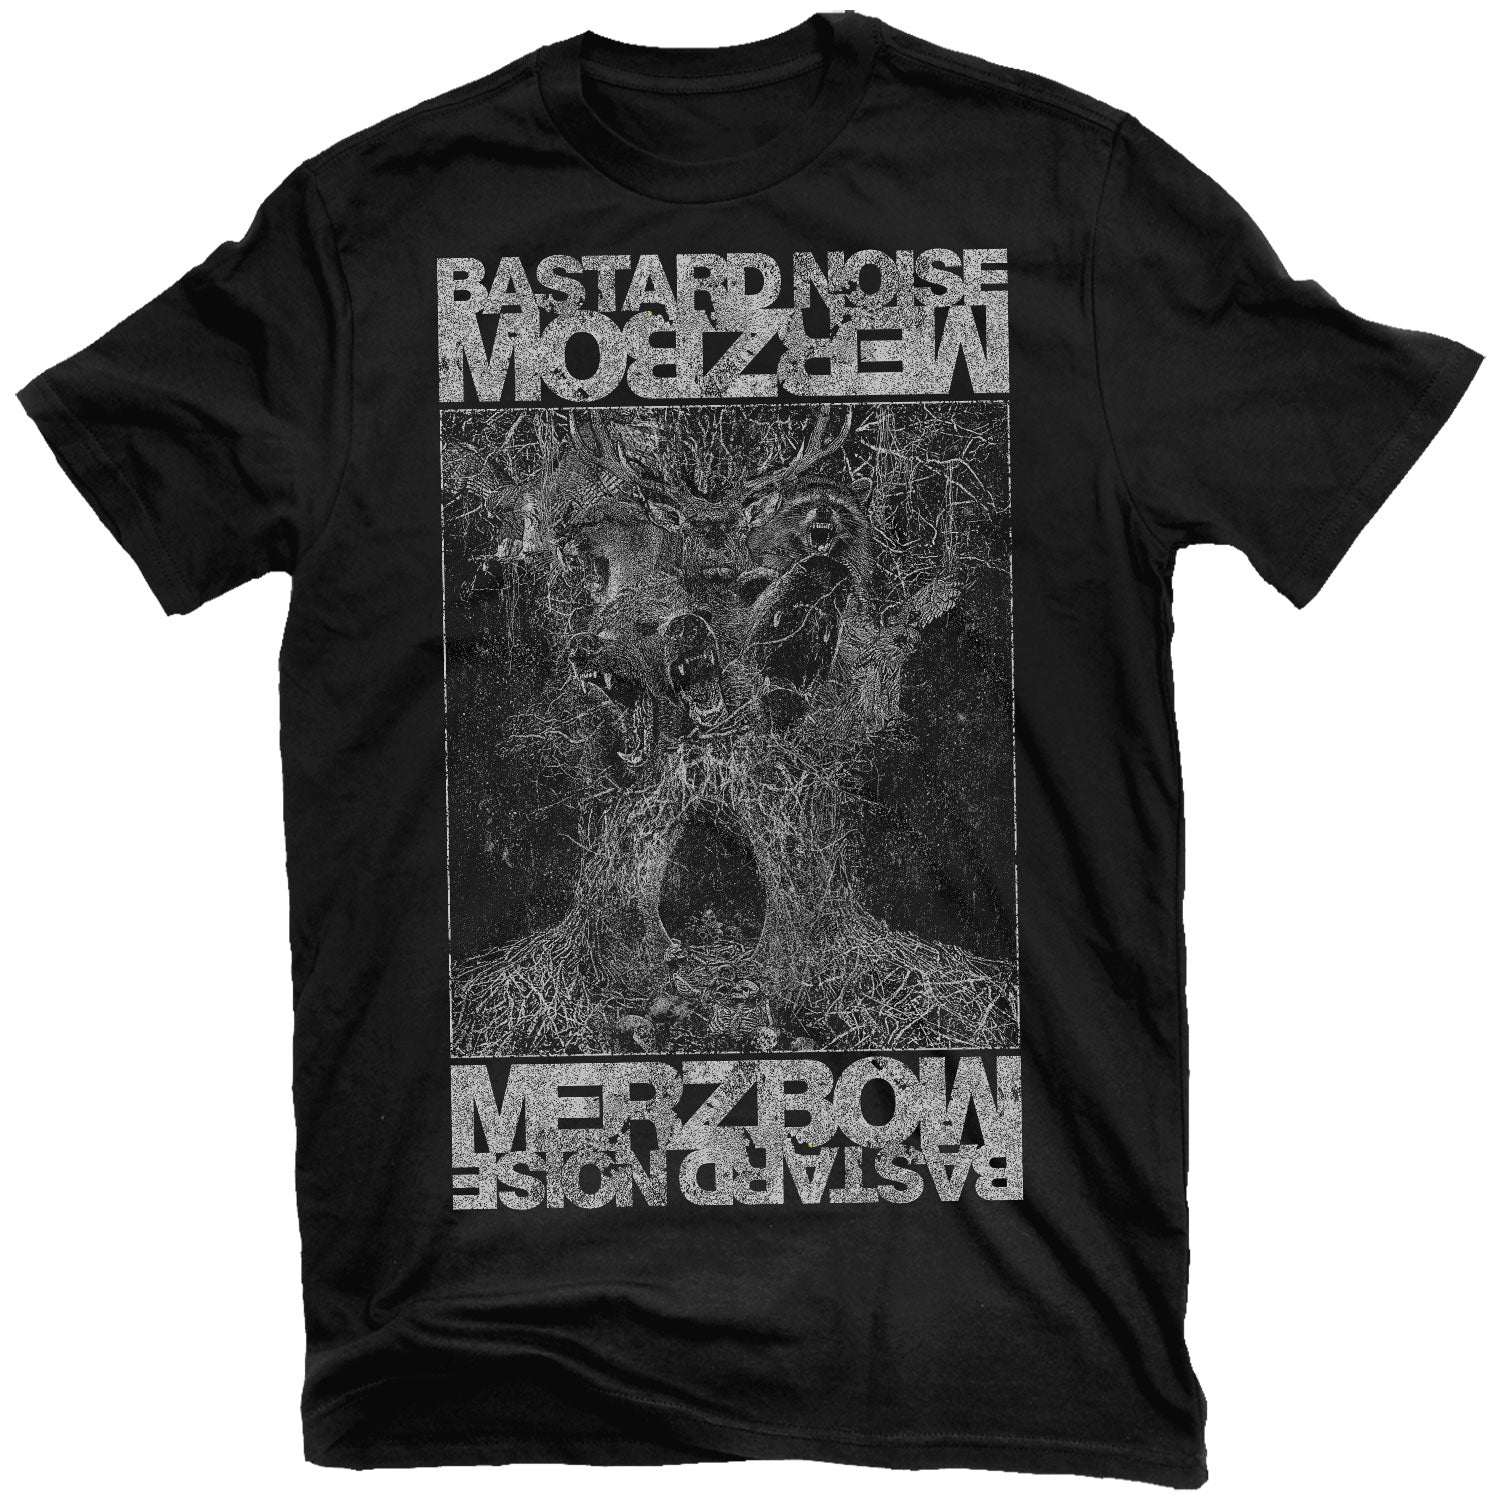 Bastard Noise / Merzbow "RETRIBUTION BY ALL OTHER CREATURES" T-Shirt